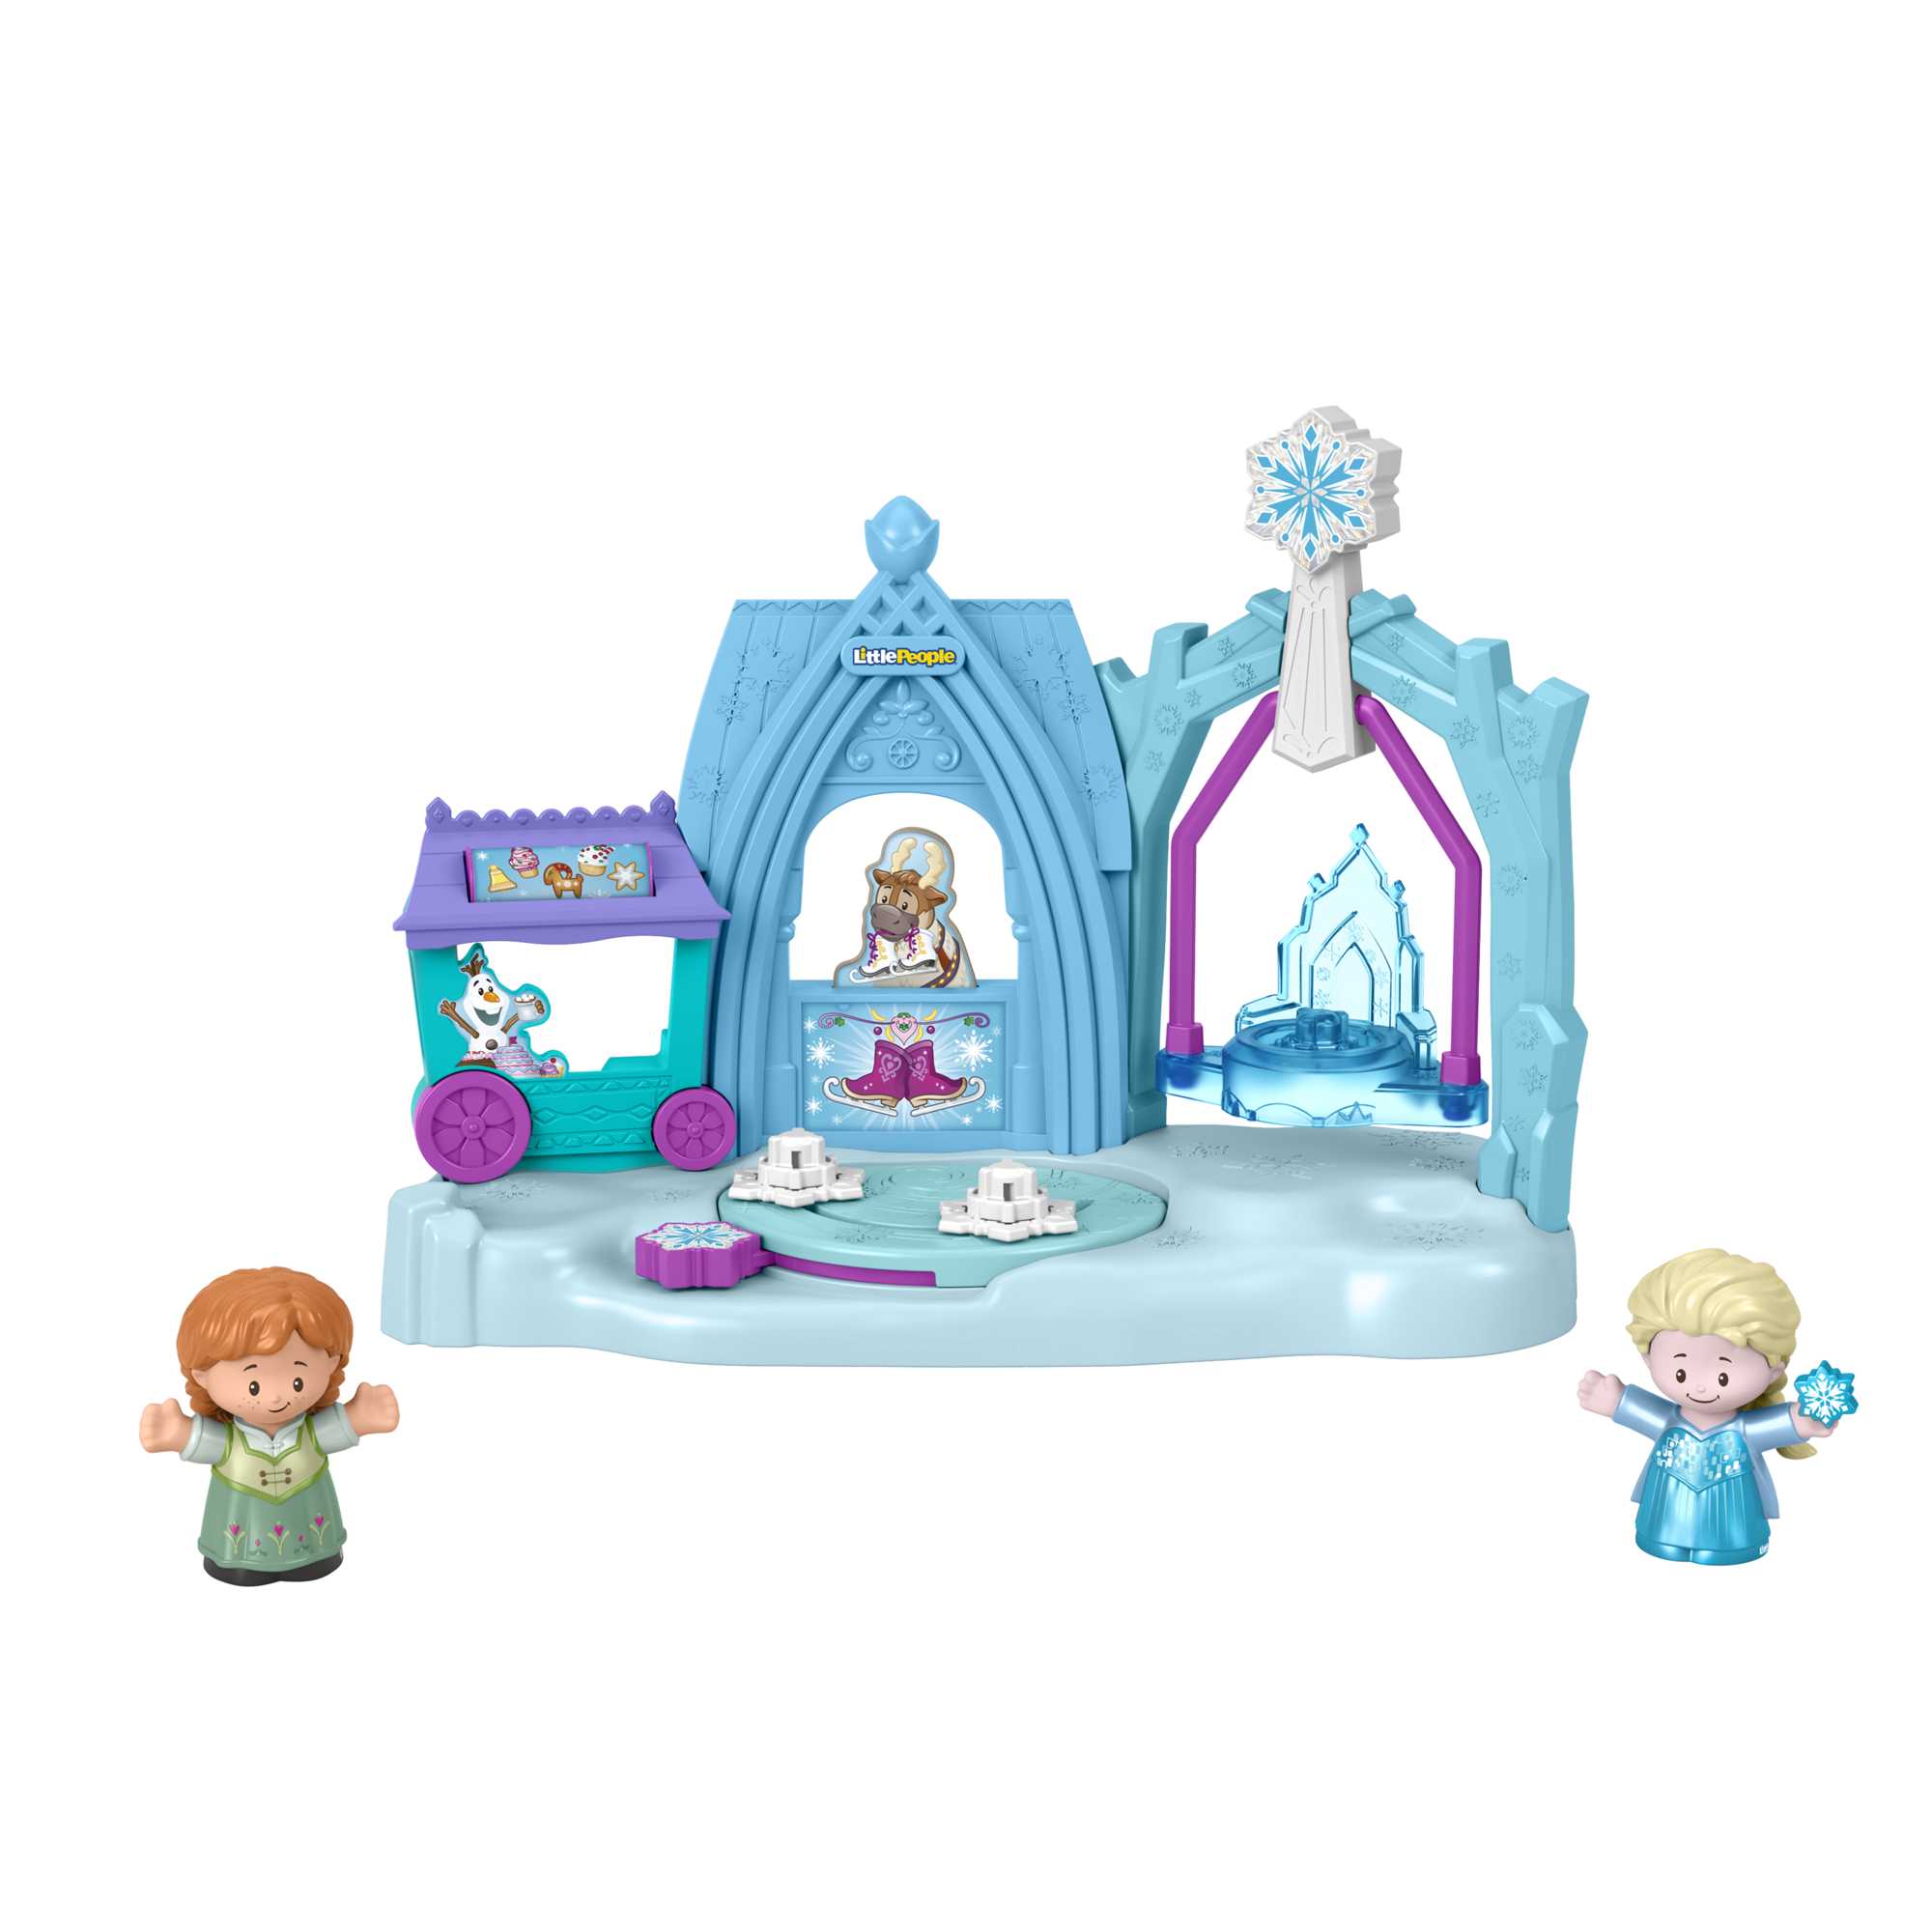 Disney Frozen Elsa's Ice Palace Little People Toddler Musical